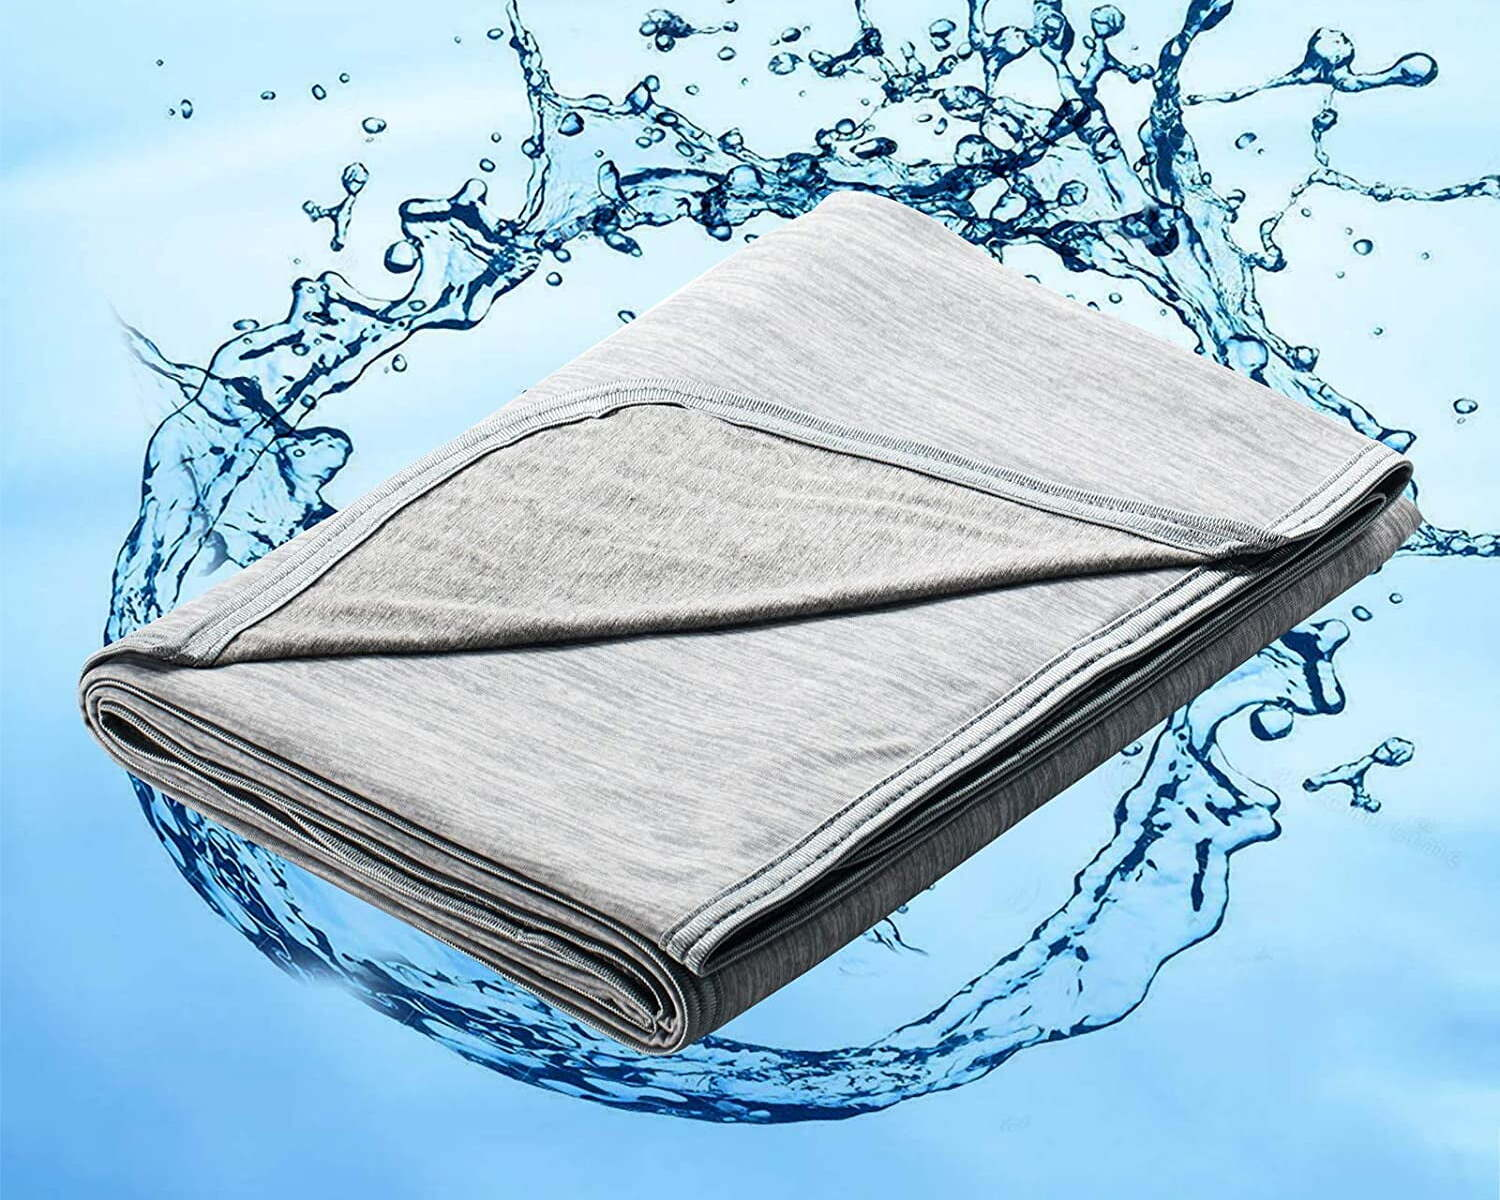 wick moisture cooling fabric improve sleep quality high temperature zones absorbing body heat hot weather hot sleepers absorb excess heat regulate temperature weighted blankets weighted cooling blanket cooling weighted blanket, what is a cooling blanket, air conditioner, excess heat, cooling blanket fabric, best cooling, best cooling blankets